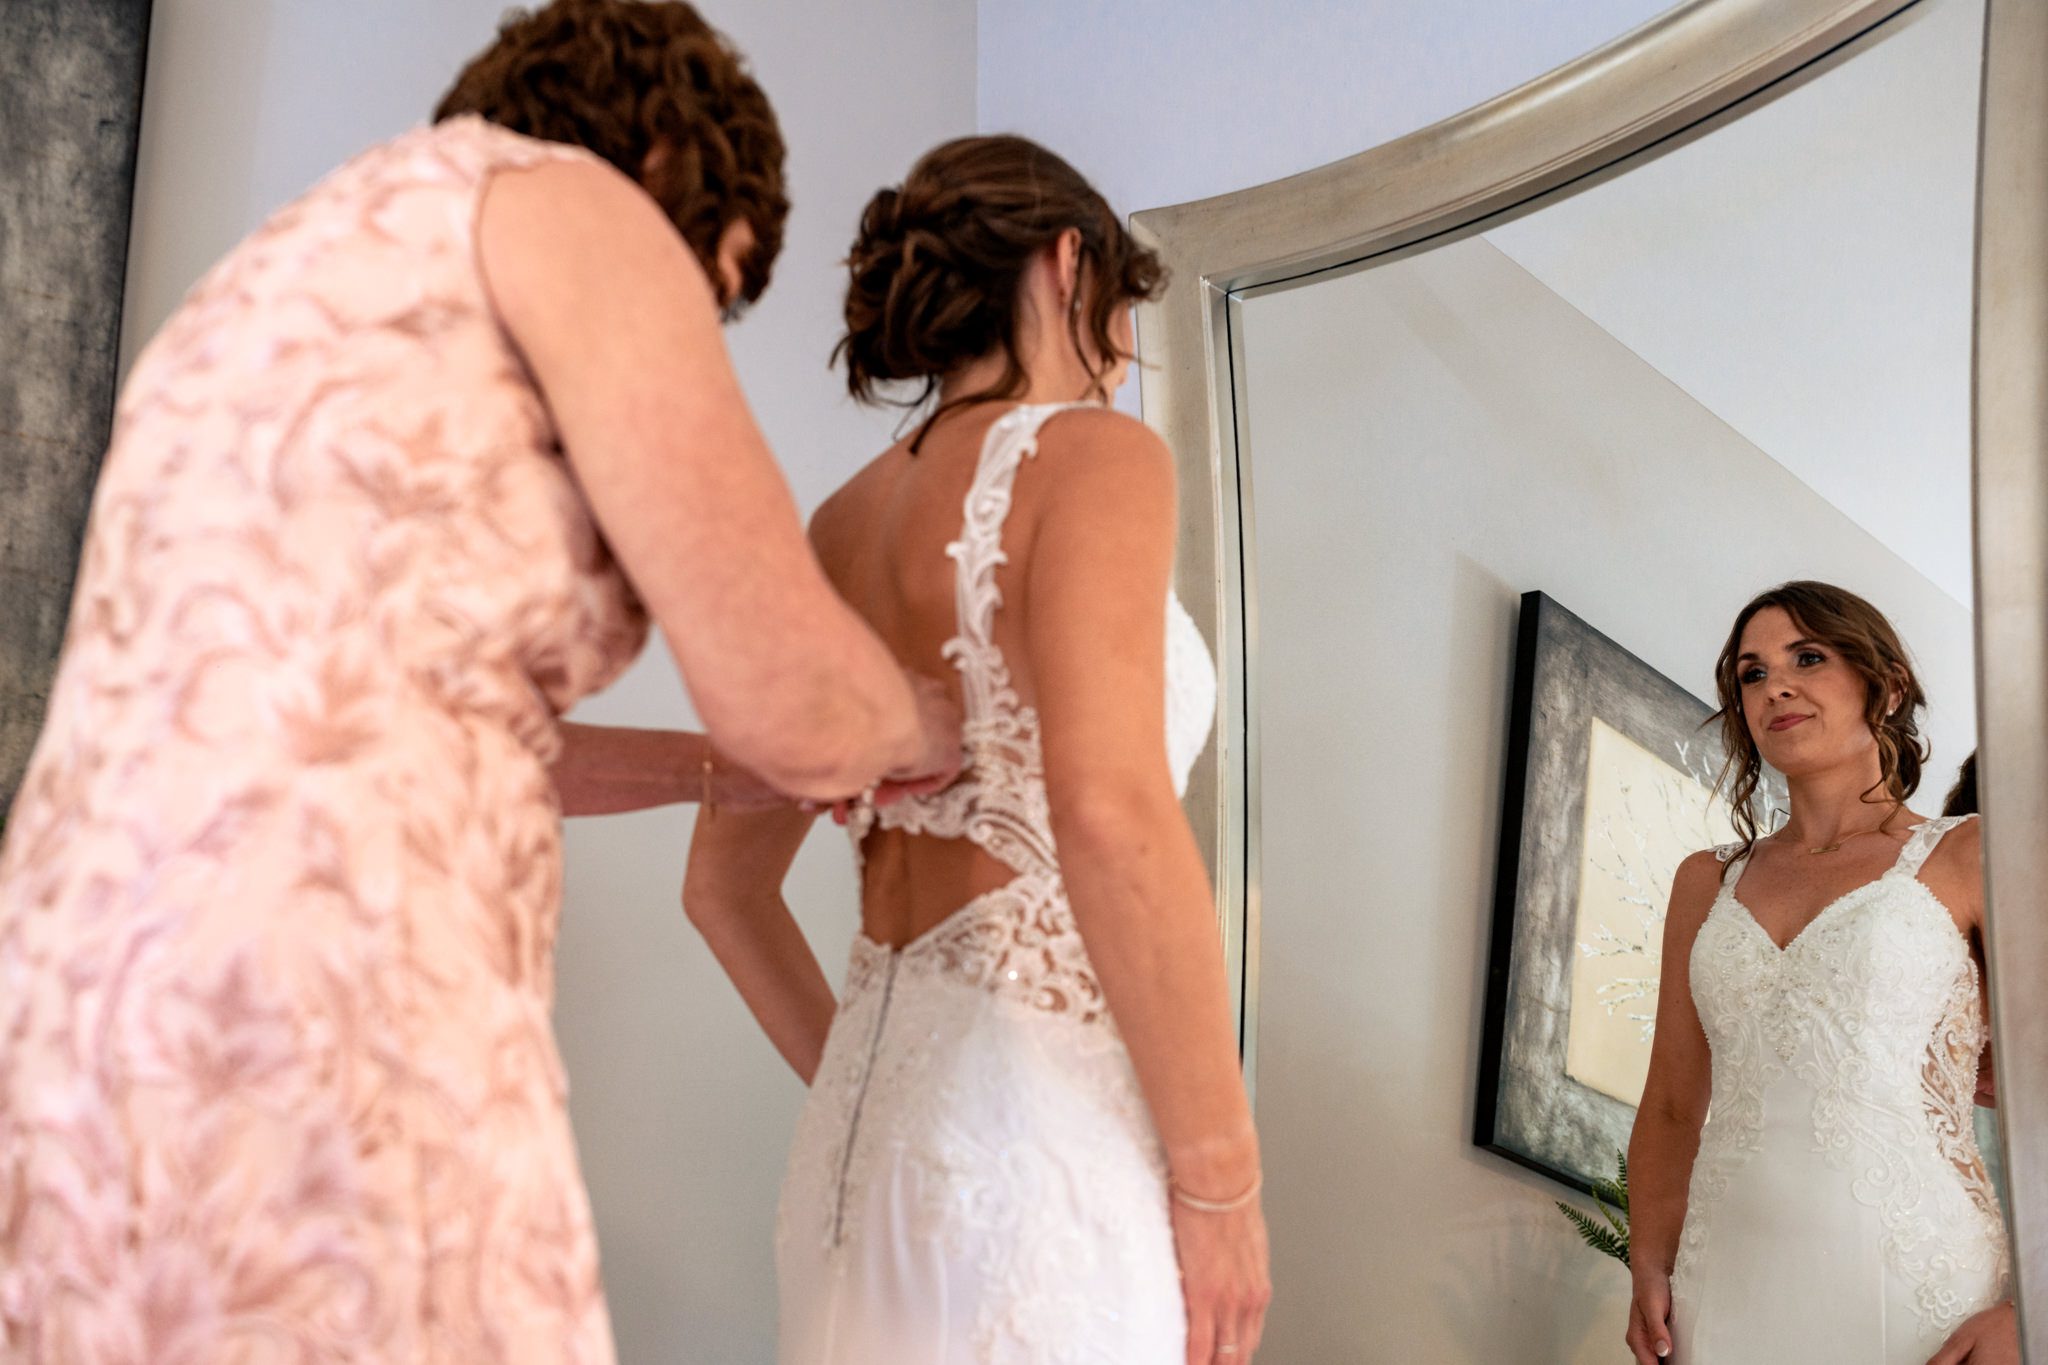 A bride getting her wedding dress on in front of a mirror at the Crest Pavilion captured by a documentary wedding photographer.